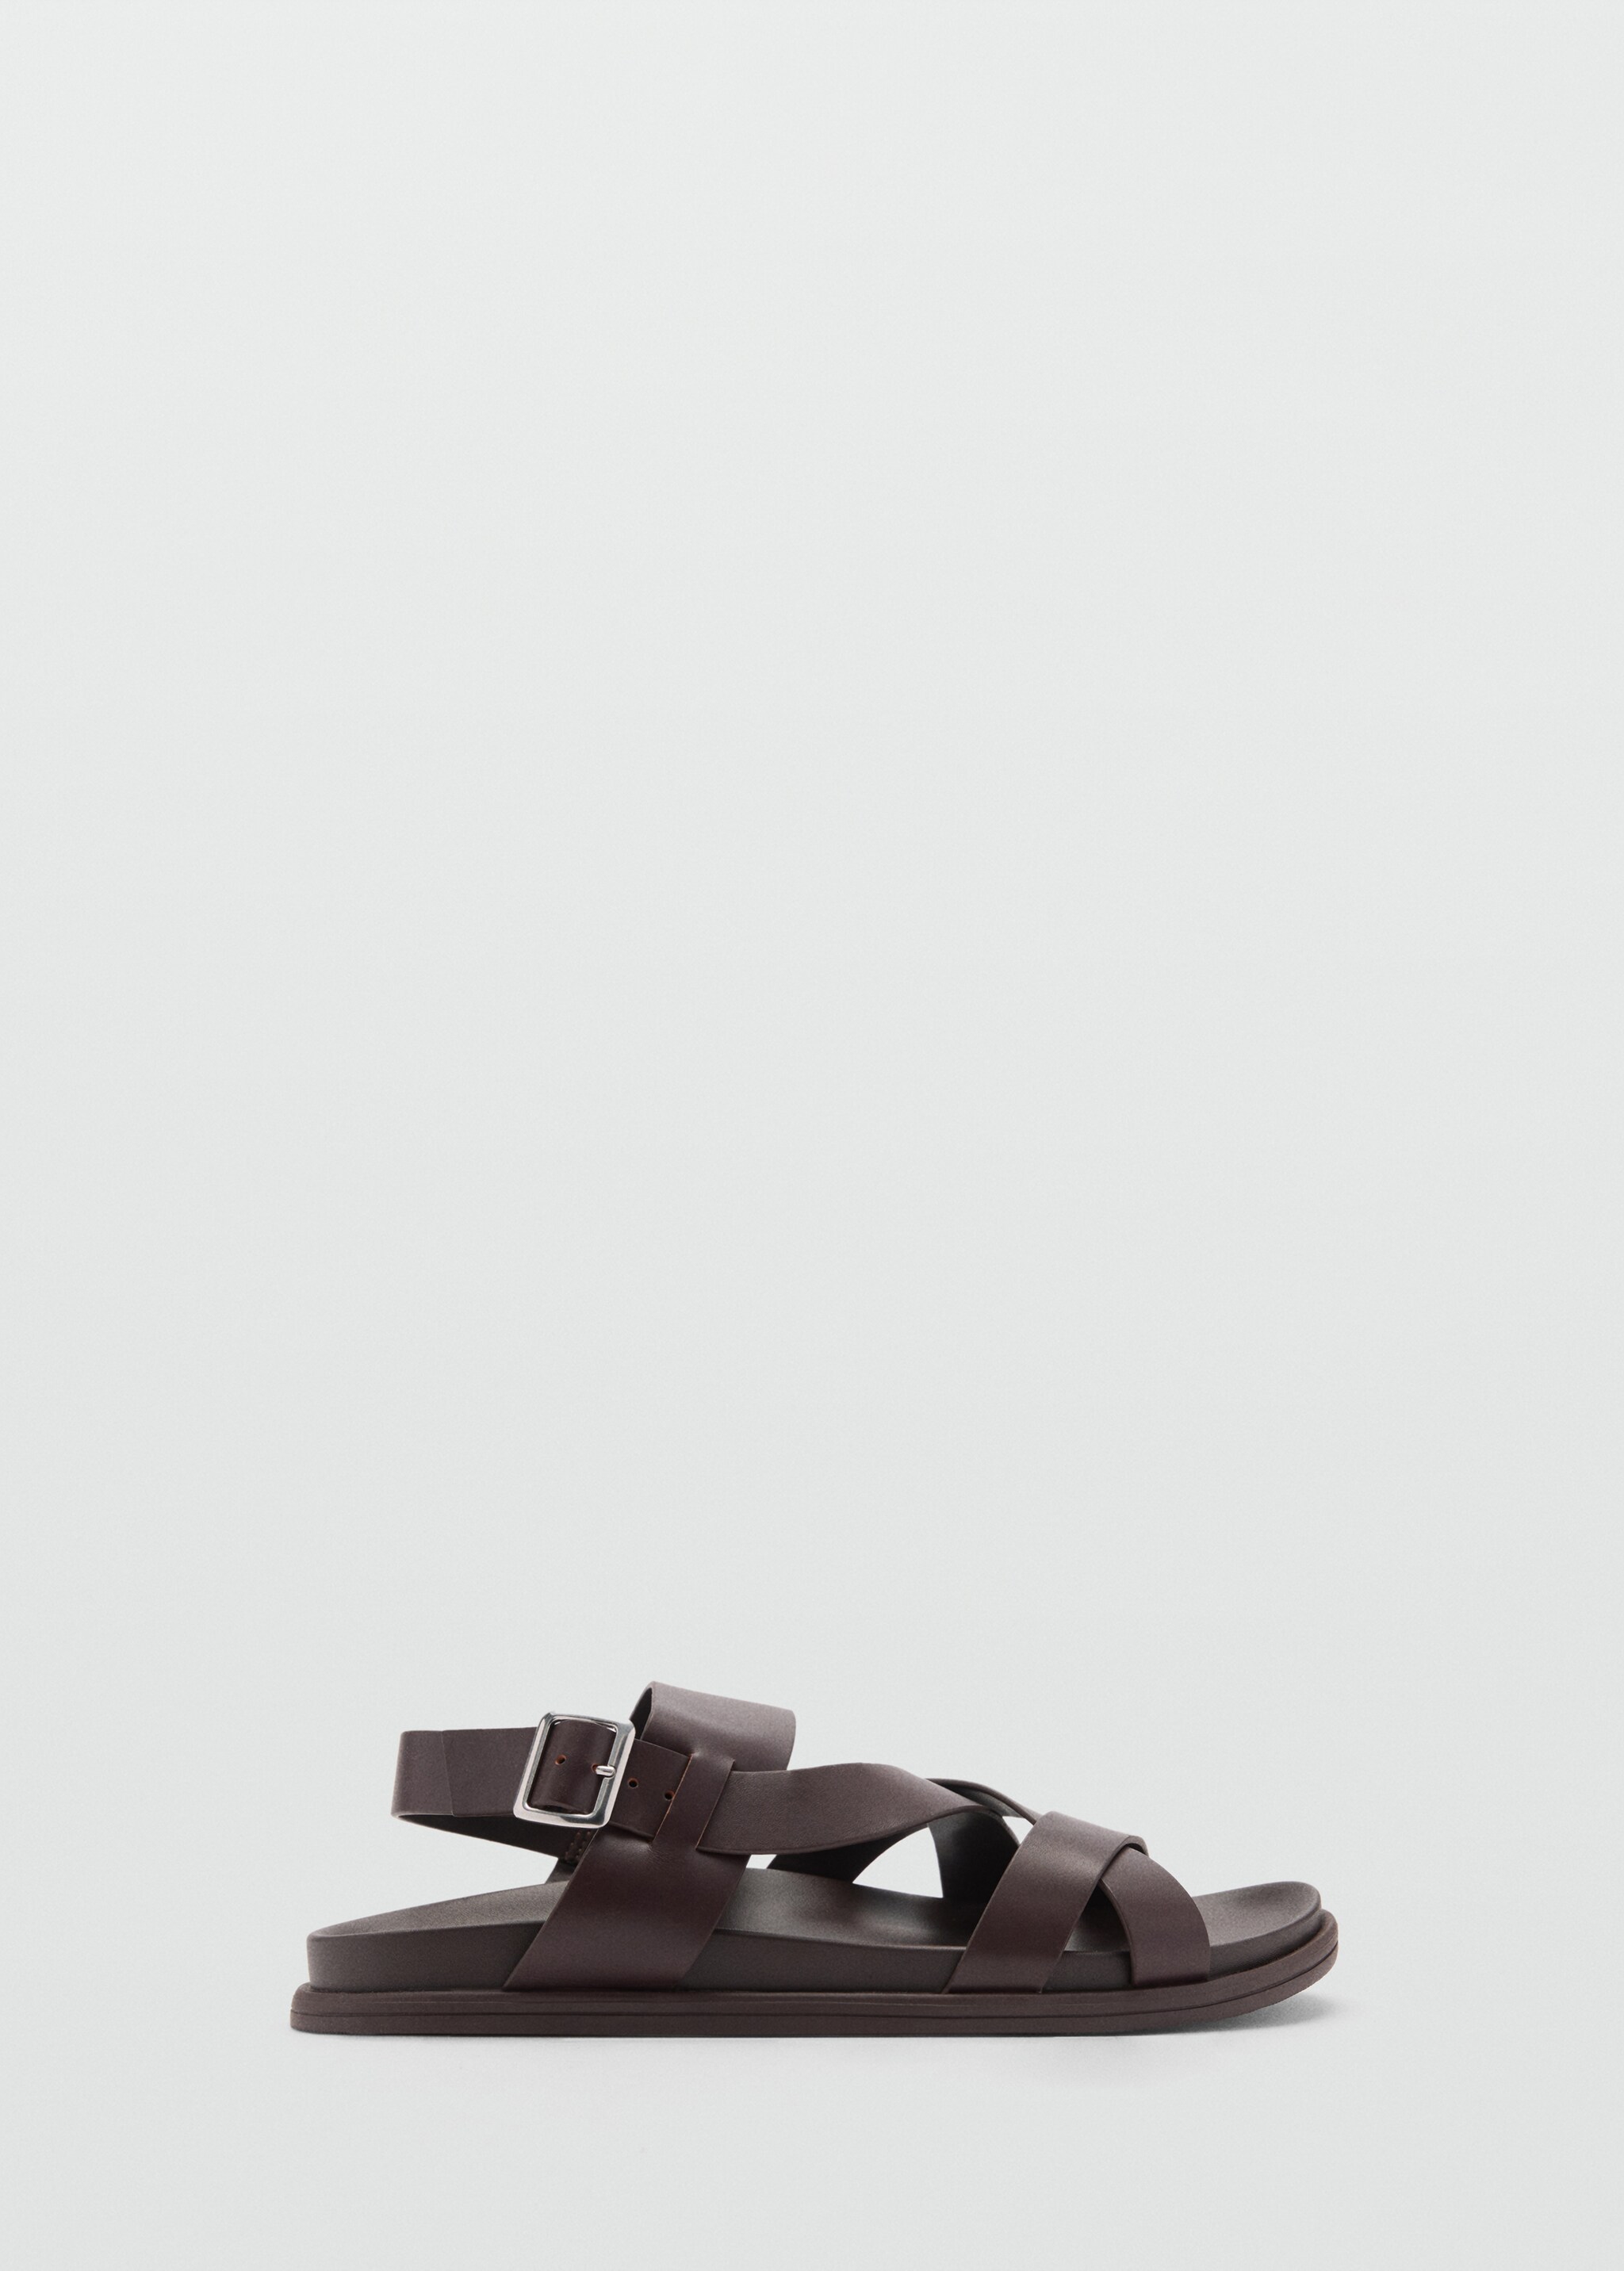 100% leather crossed strap sandal - Article without model